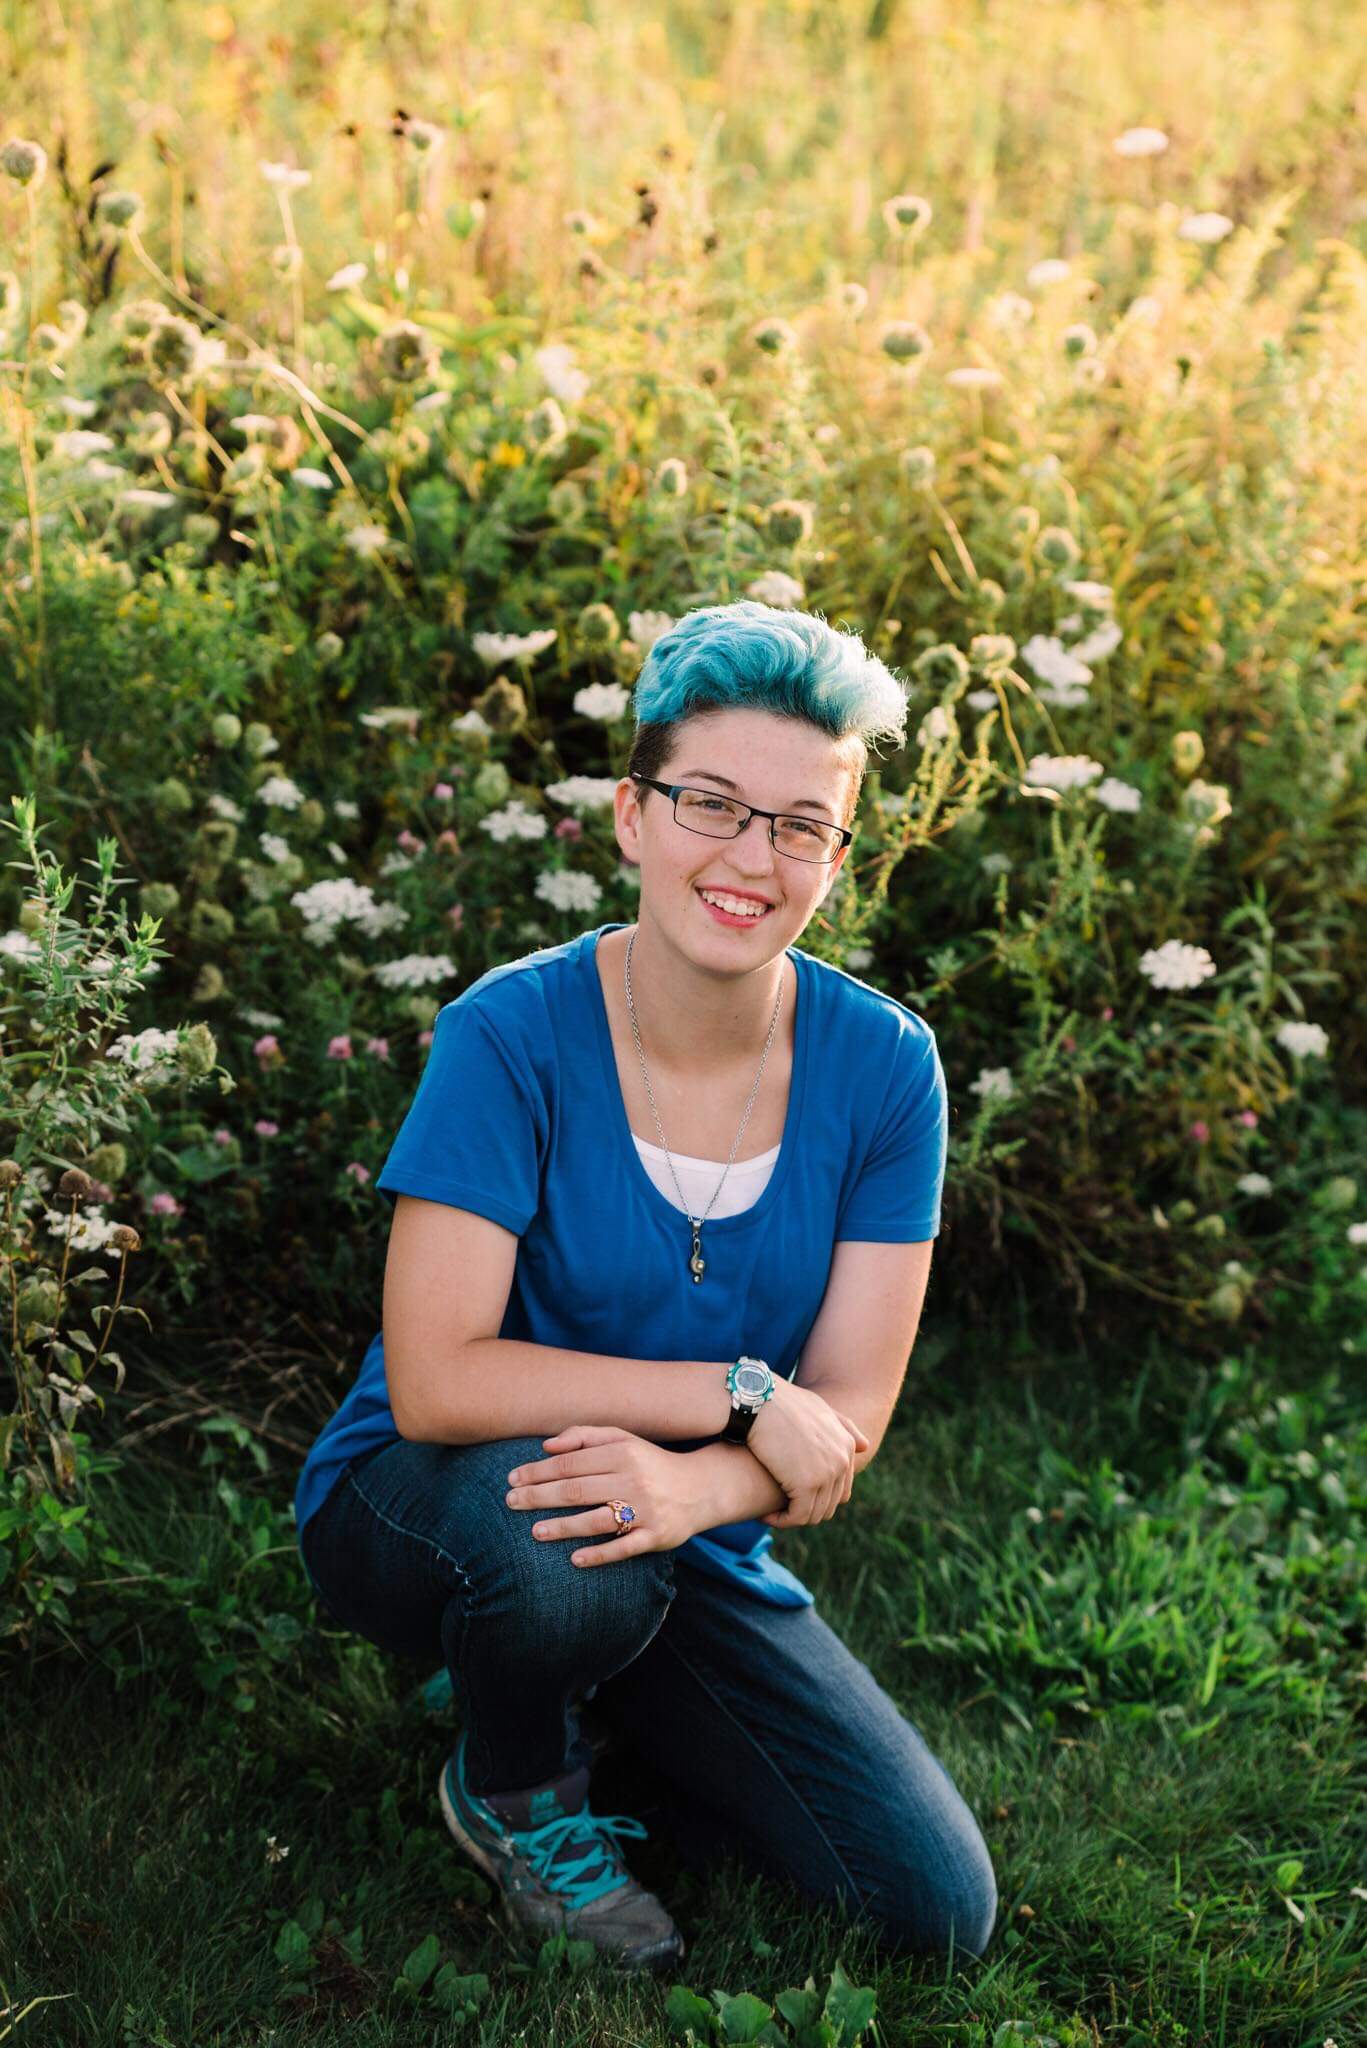 A young woman with blue hair, glasses, and a wristwatch wearing a predominantly blue business casual outfit. She is on one knee on a grassy path in a field of yellow wildflowers, posing for a professionally-taken high school senior photo.